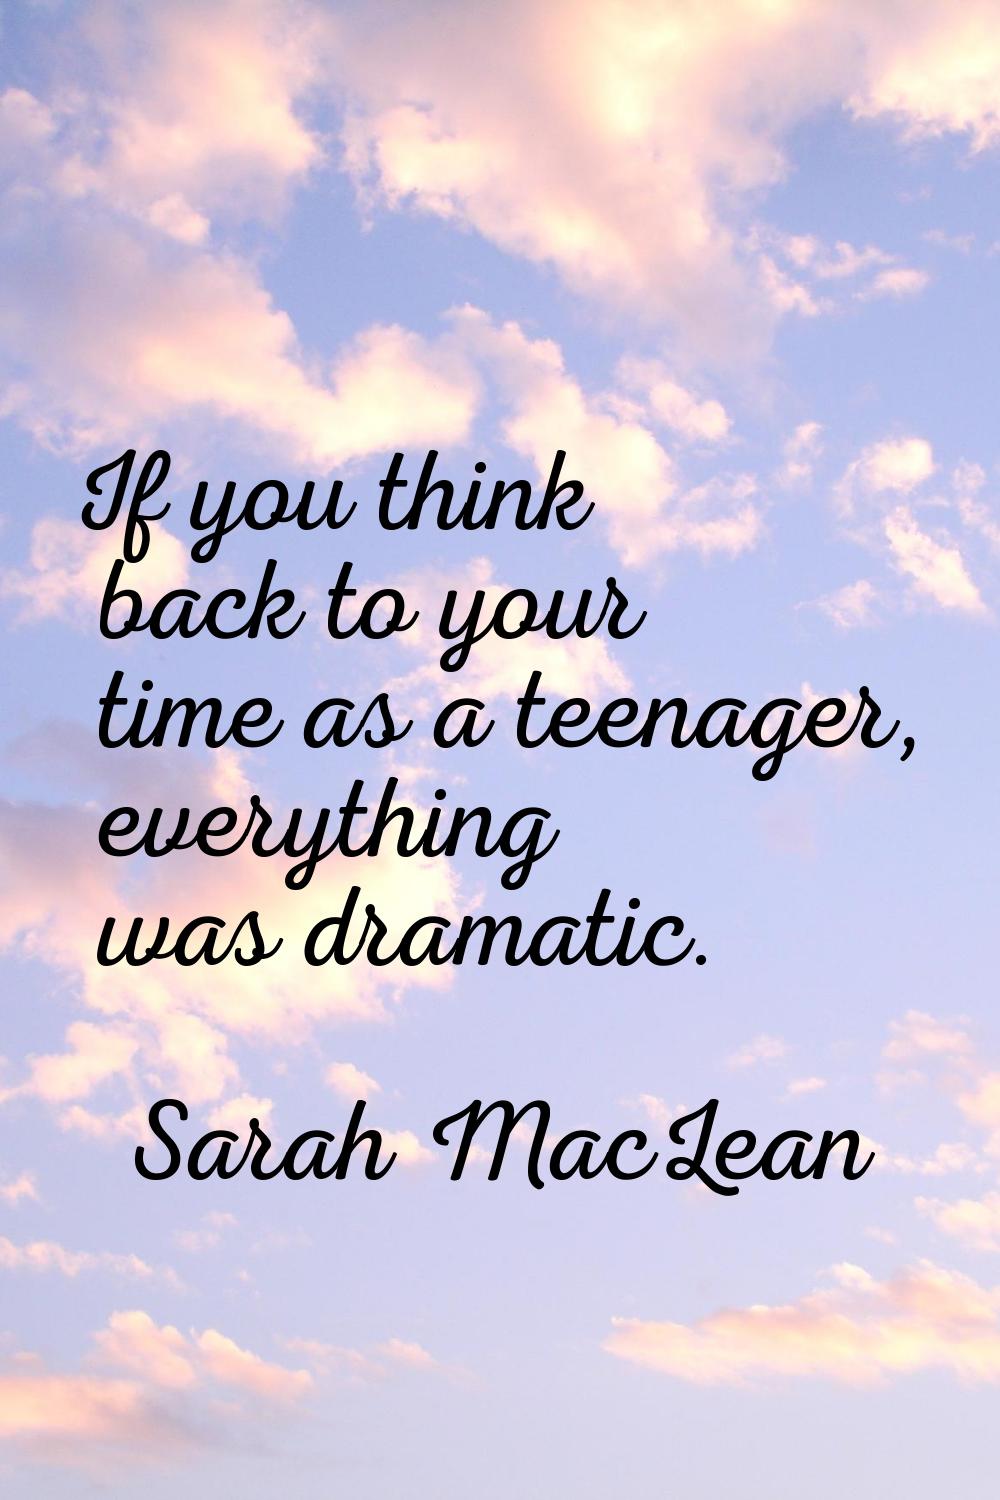 If you think back to your time as a teenager, everything was dramatic.